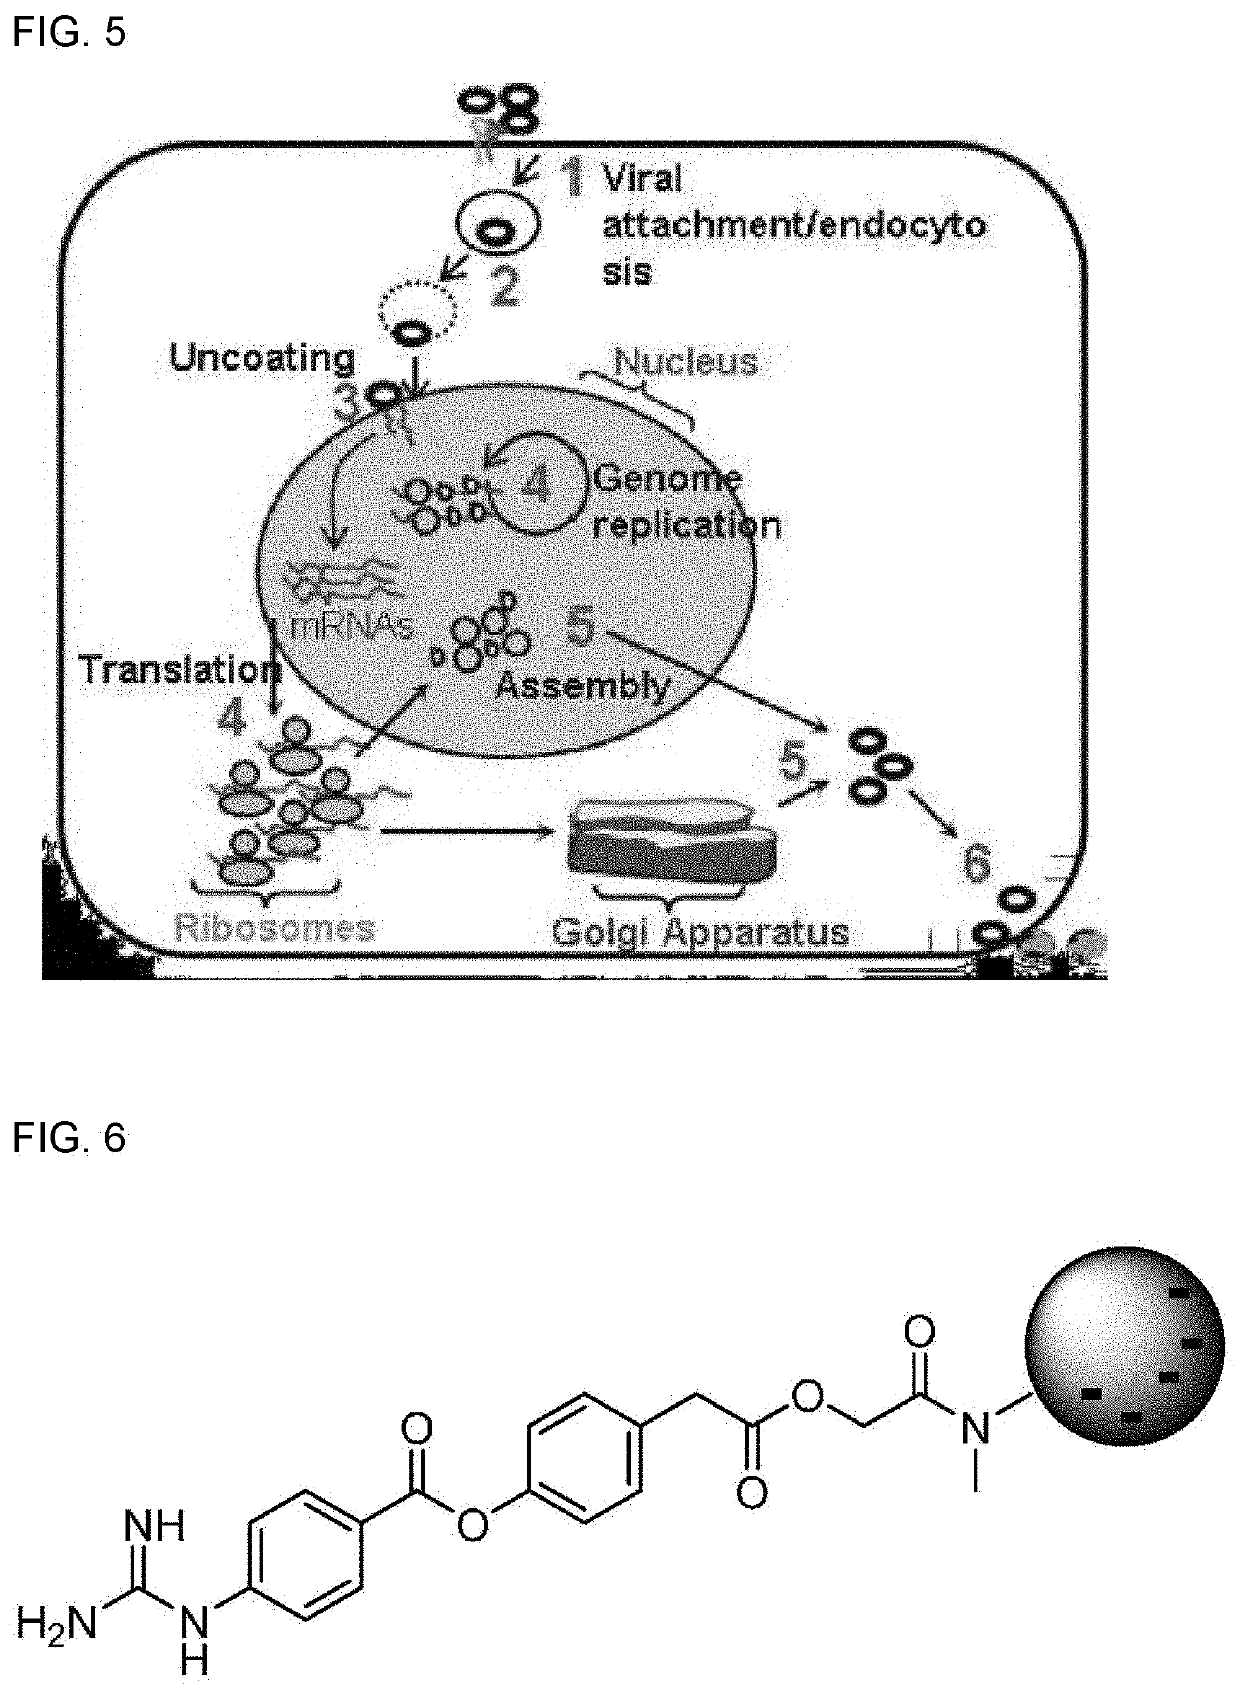 Method for preventing or treating infection of respiratory virus utilizing gold nanoparticles